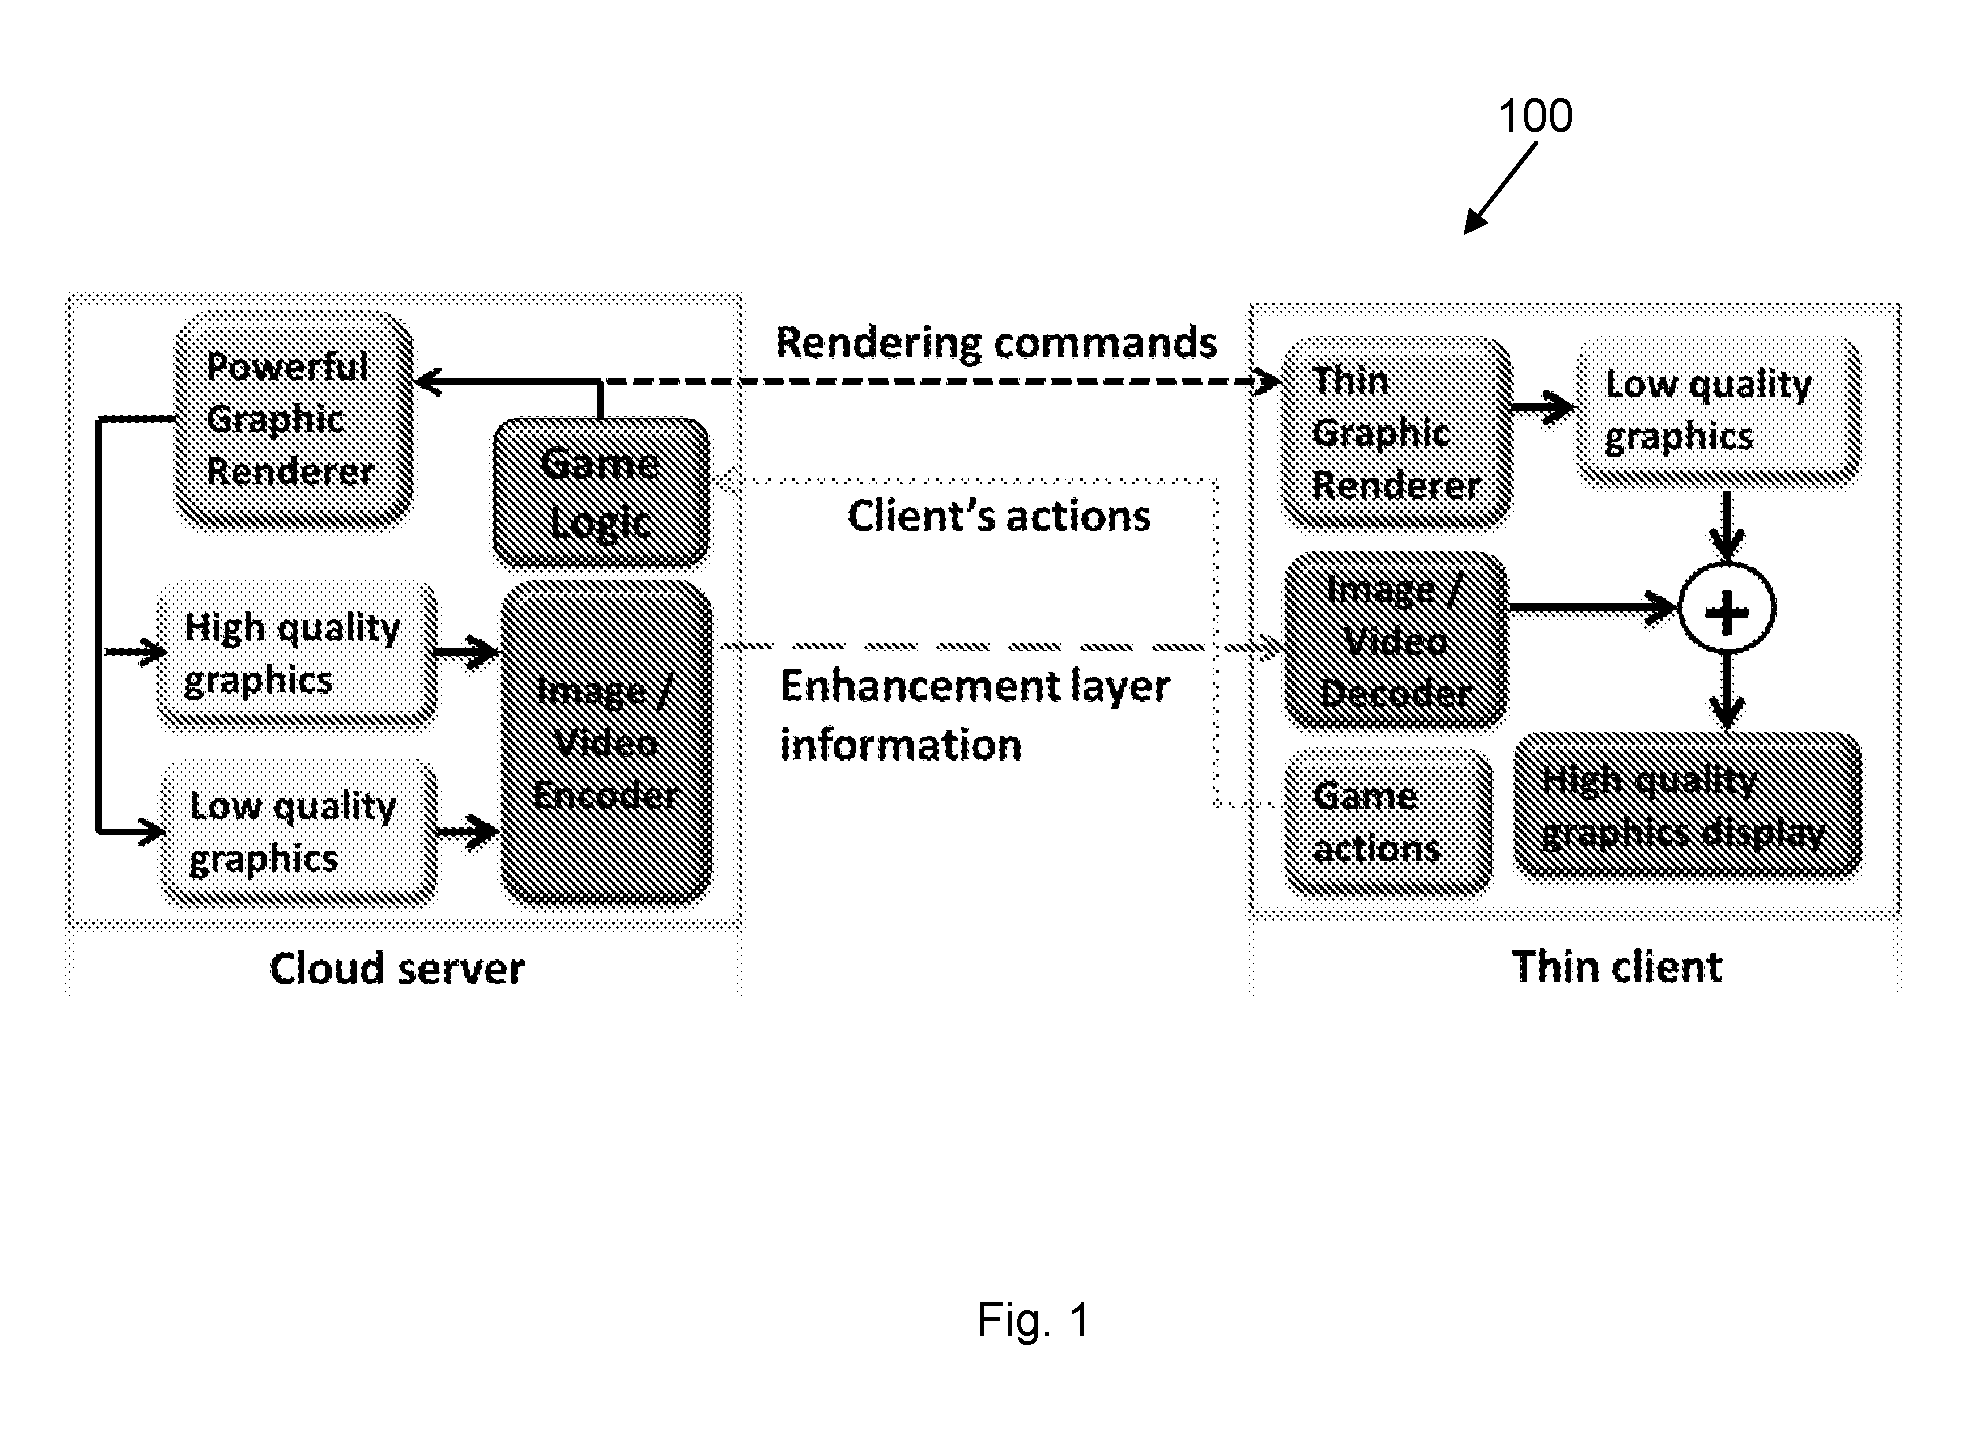 A method and apparatus for reducing data bandwidth between a cloud server and a thin client